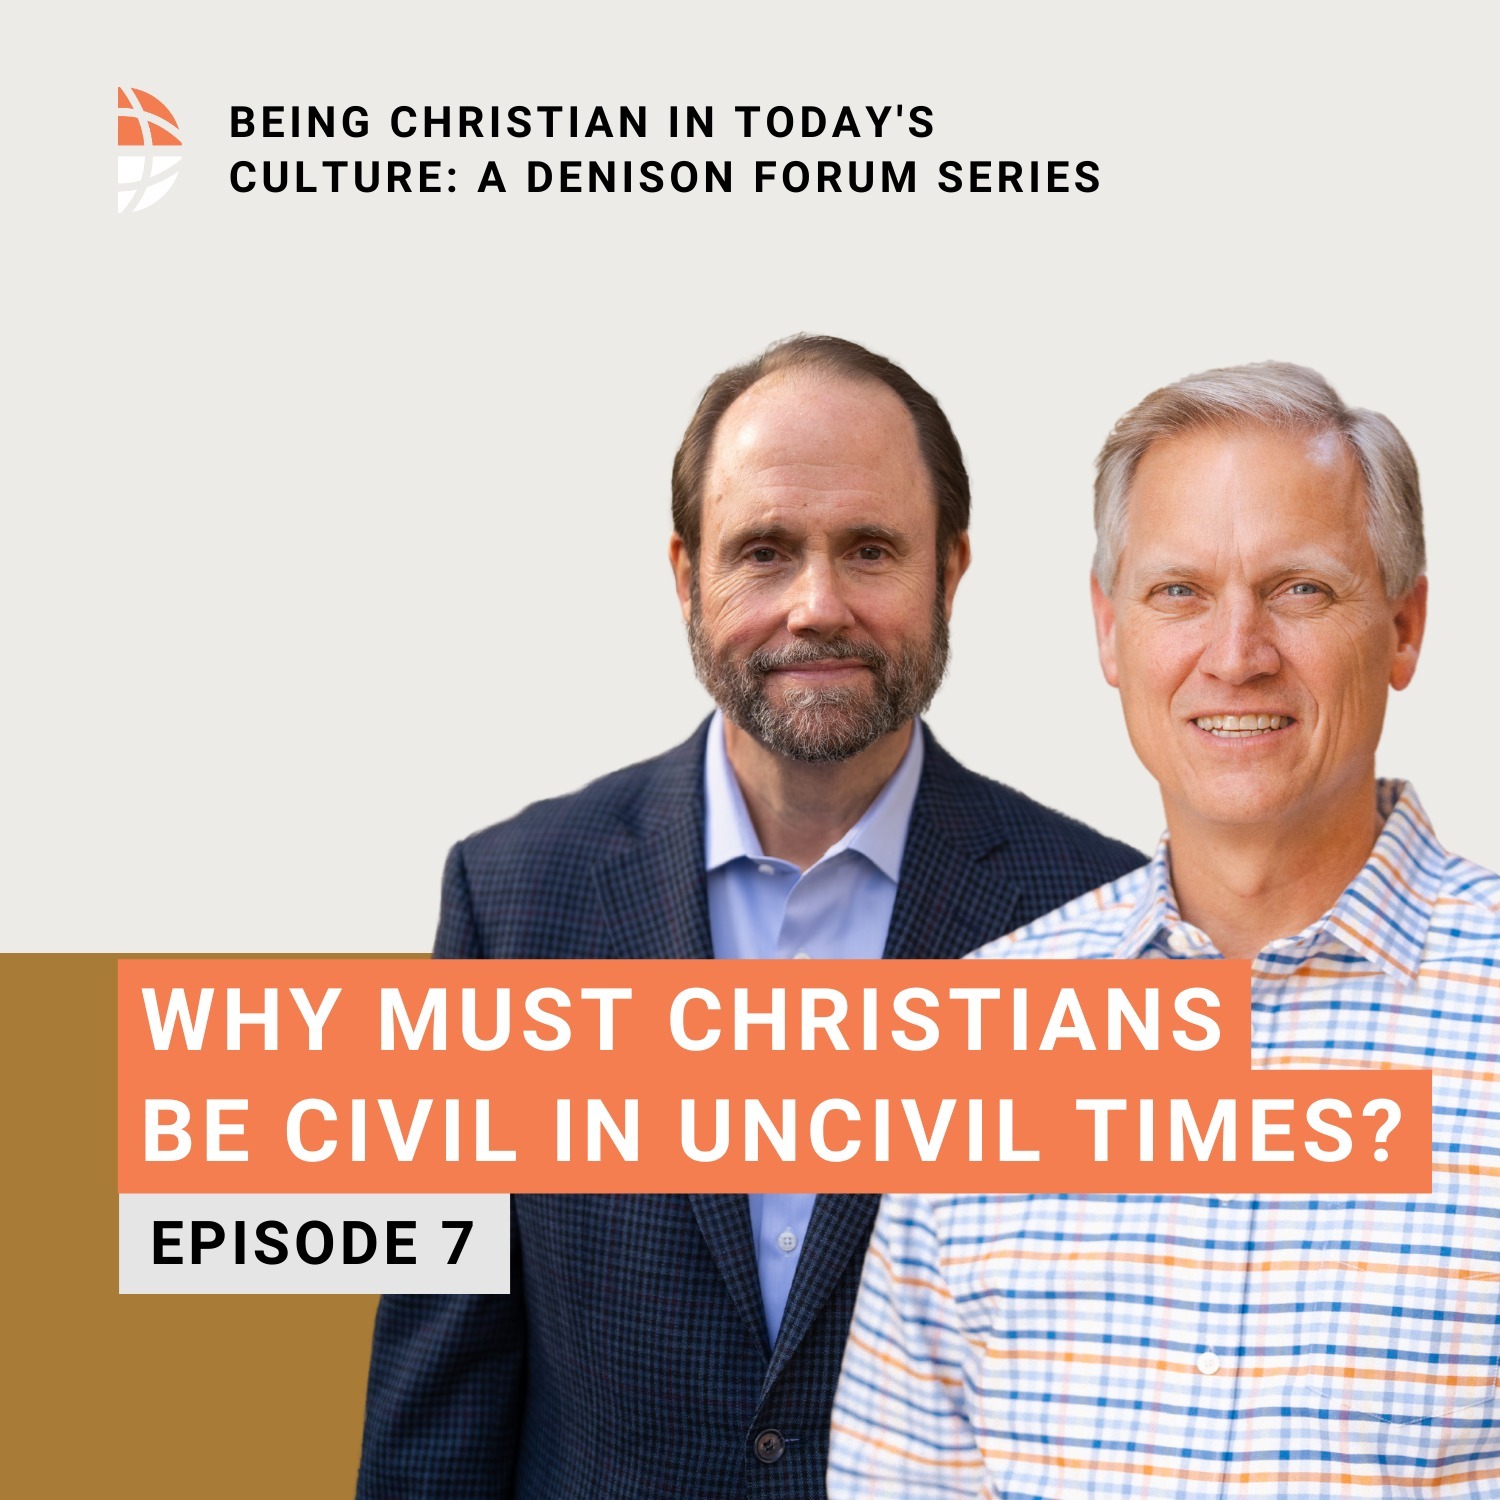 Why must Christians be civil in uncivil times? - Part 7